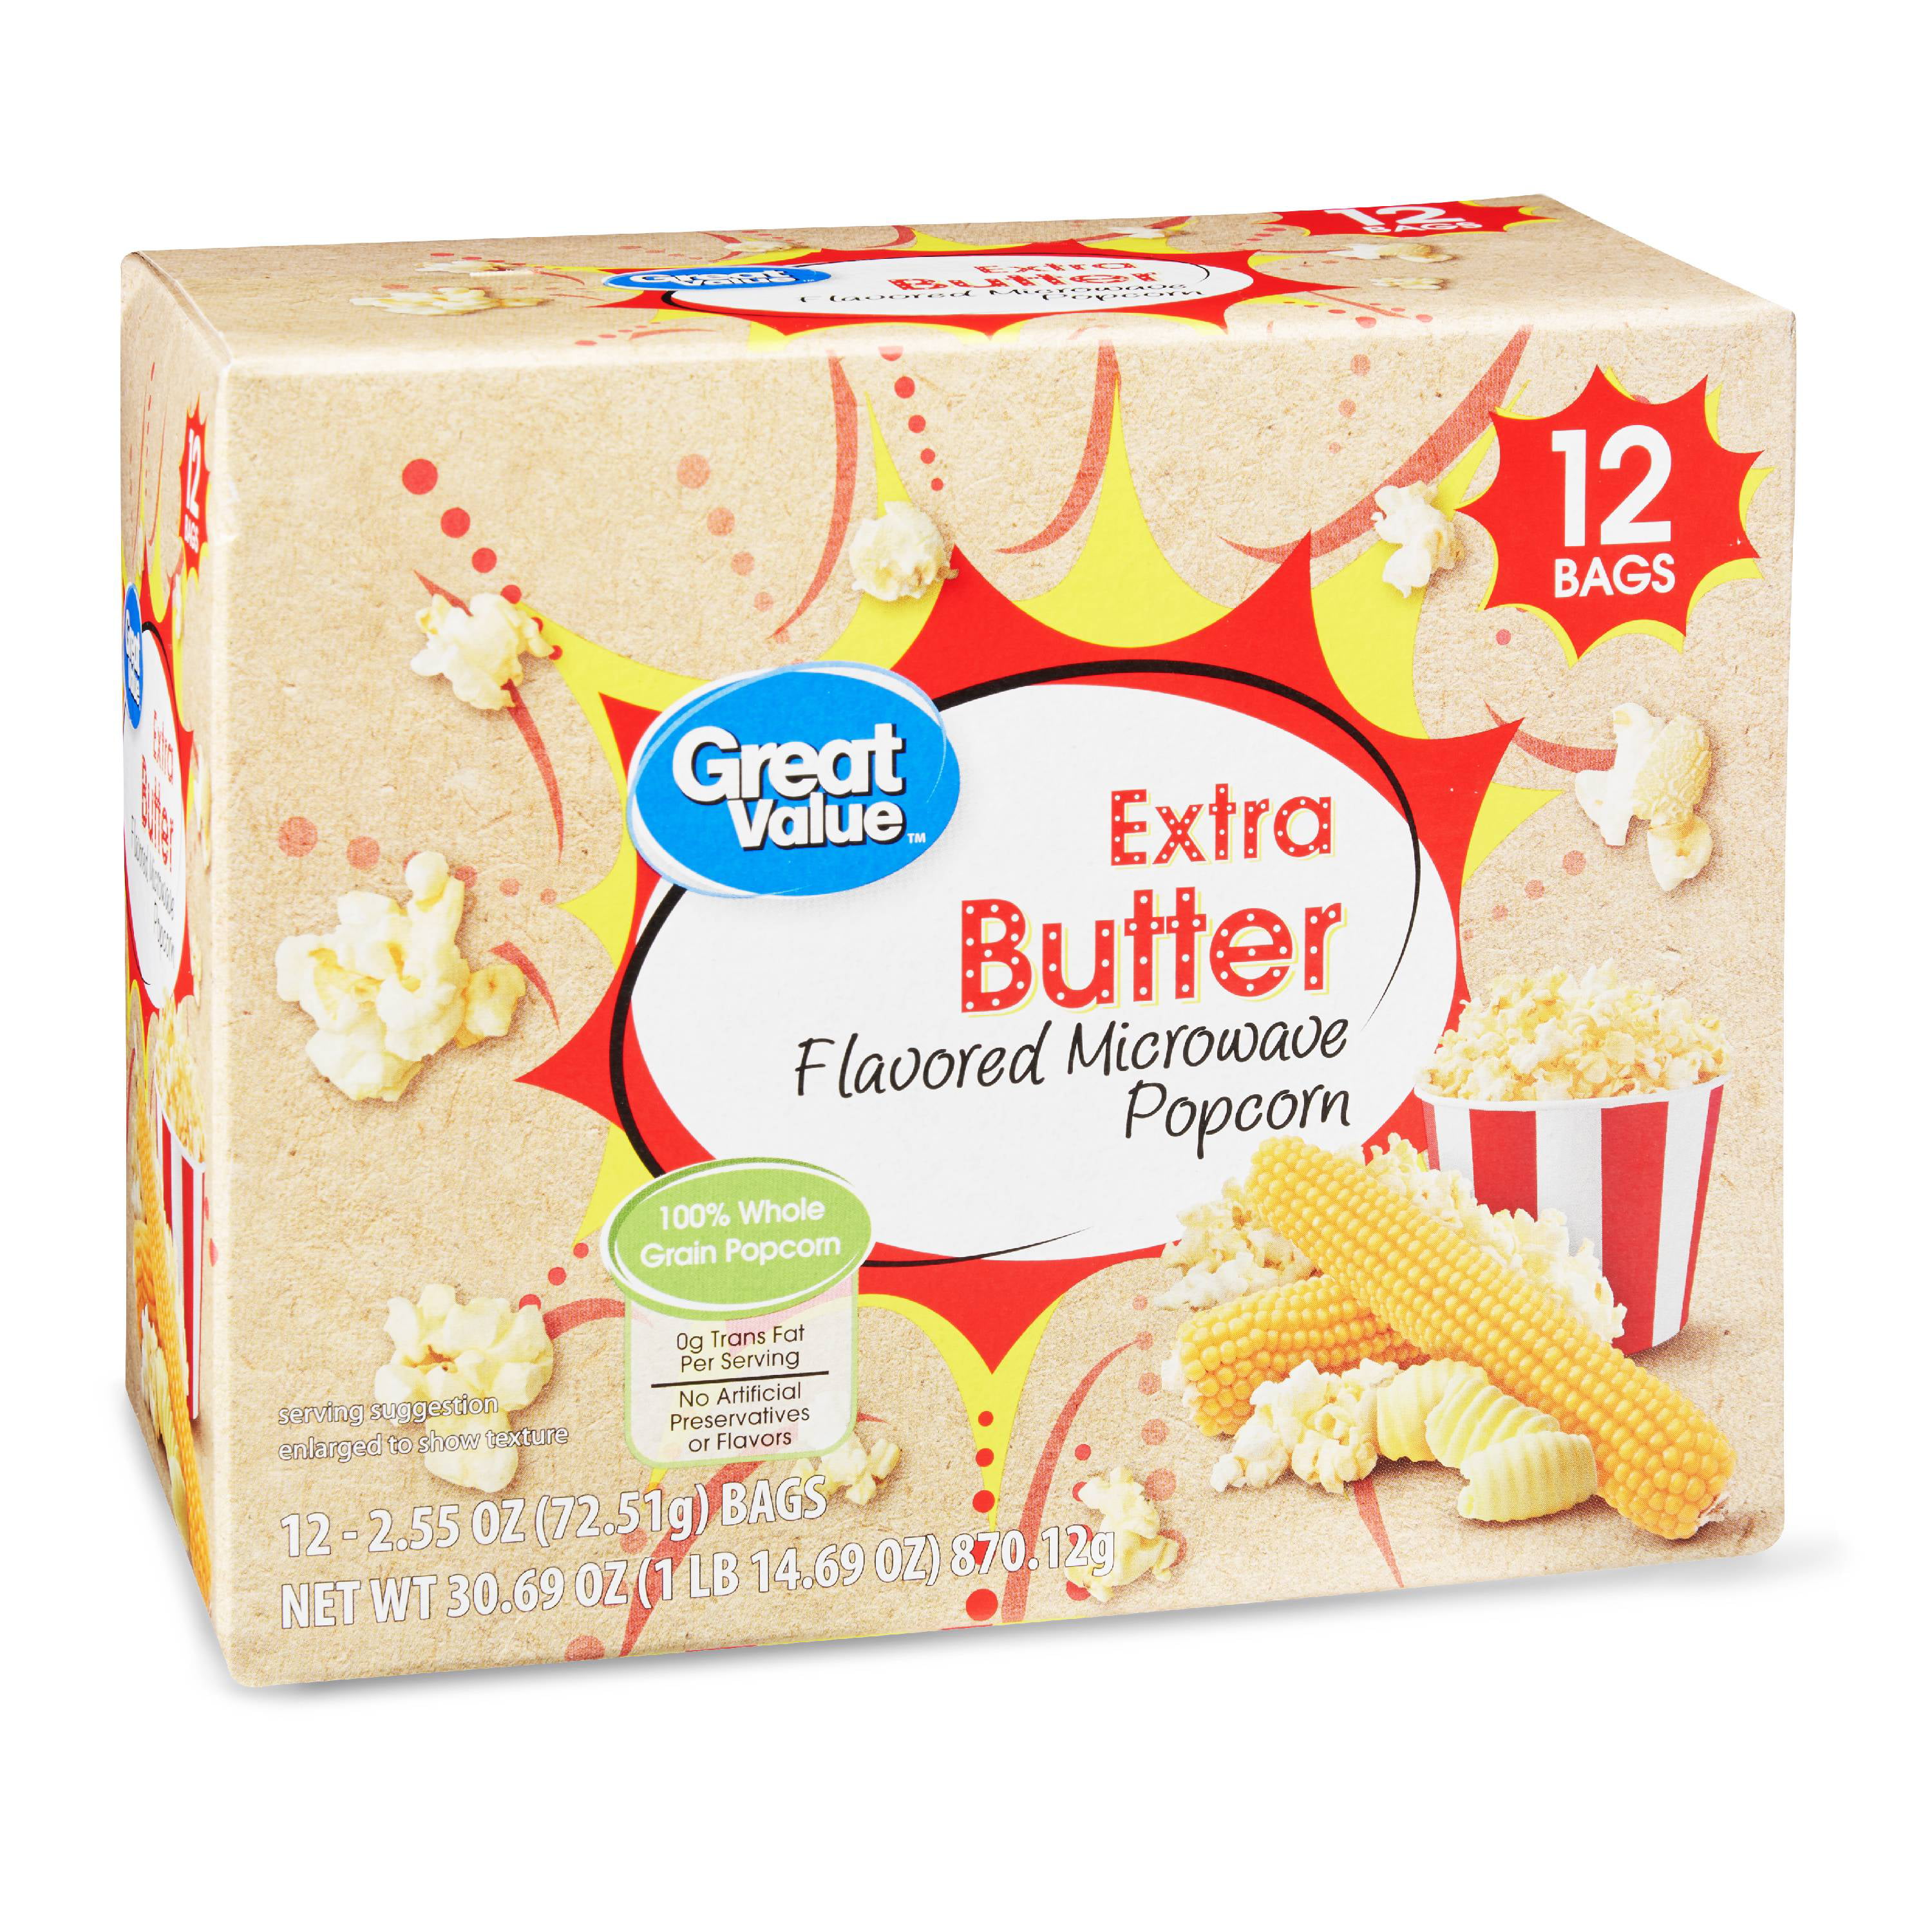 Great Value Extra Butter Flavored Microwave Popcorn, 2.55 Oz., 12 Count - Walmart.com